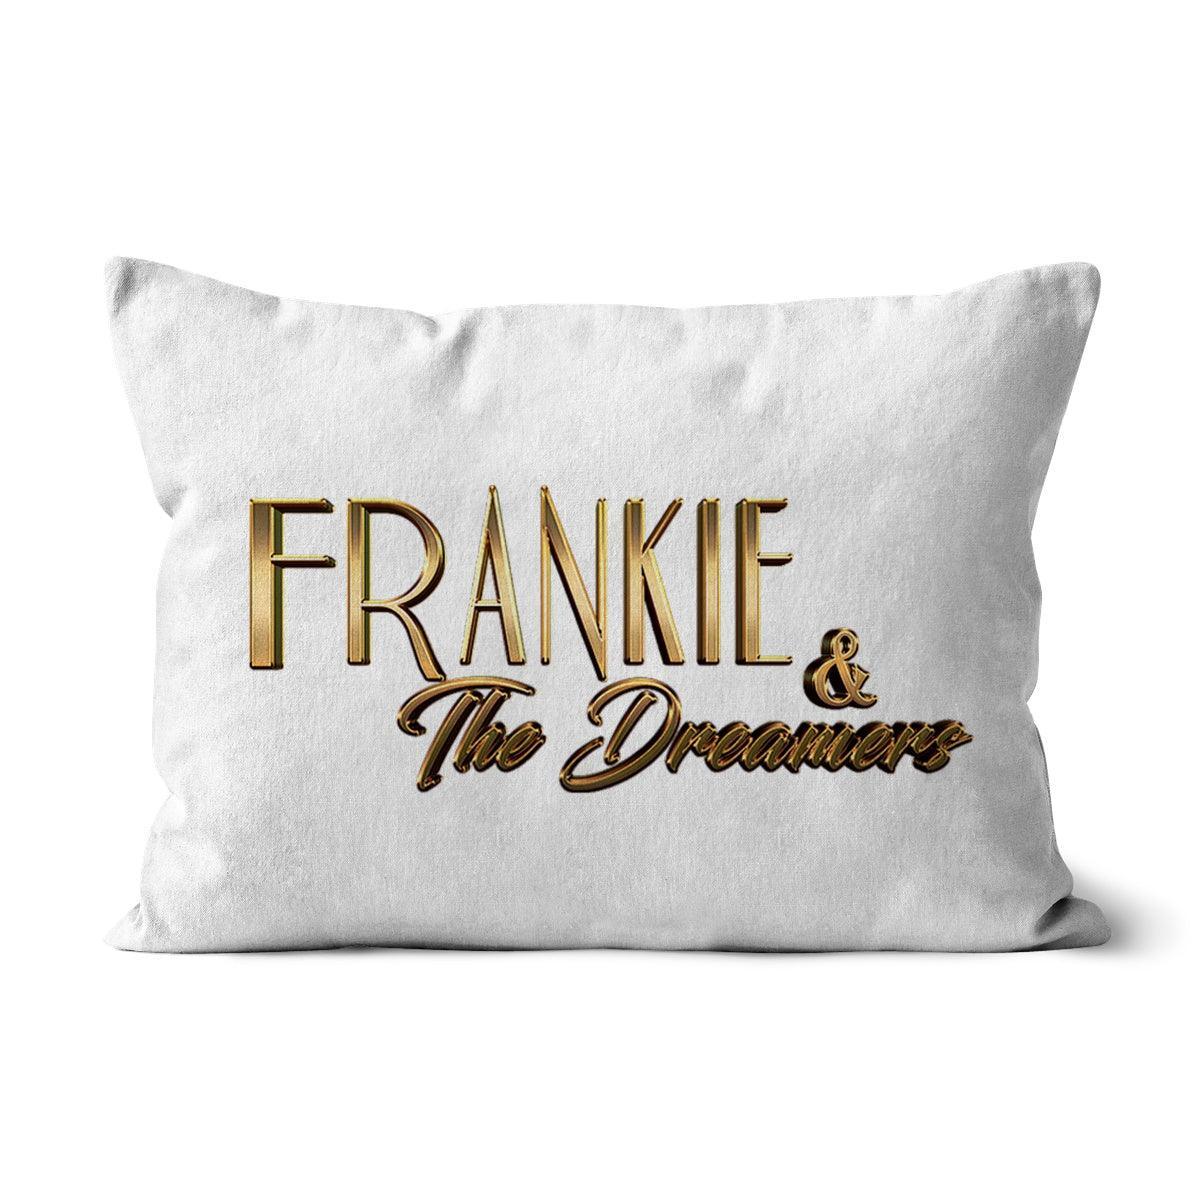 Frankie And The Dreamers Cushion | Homeware Faux Suede 19"x13"